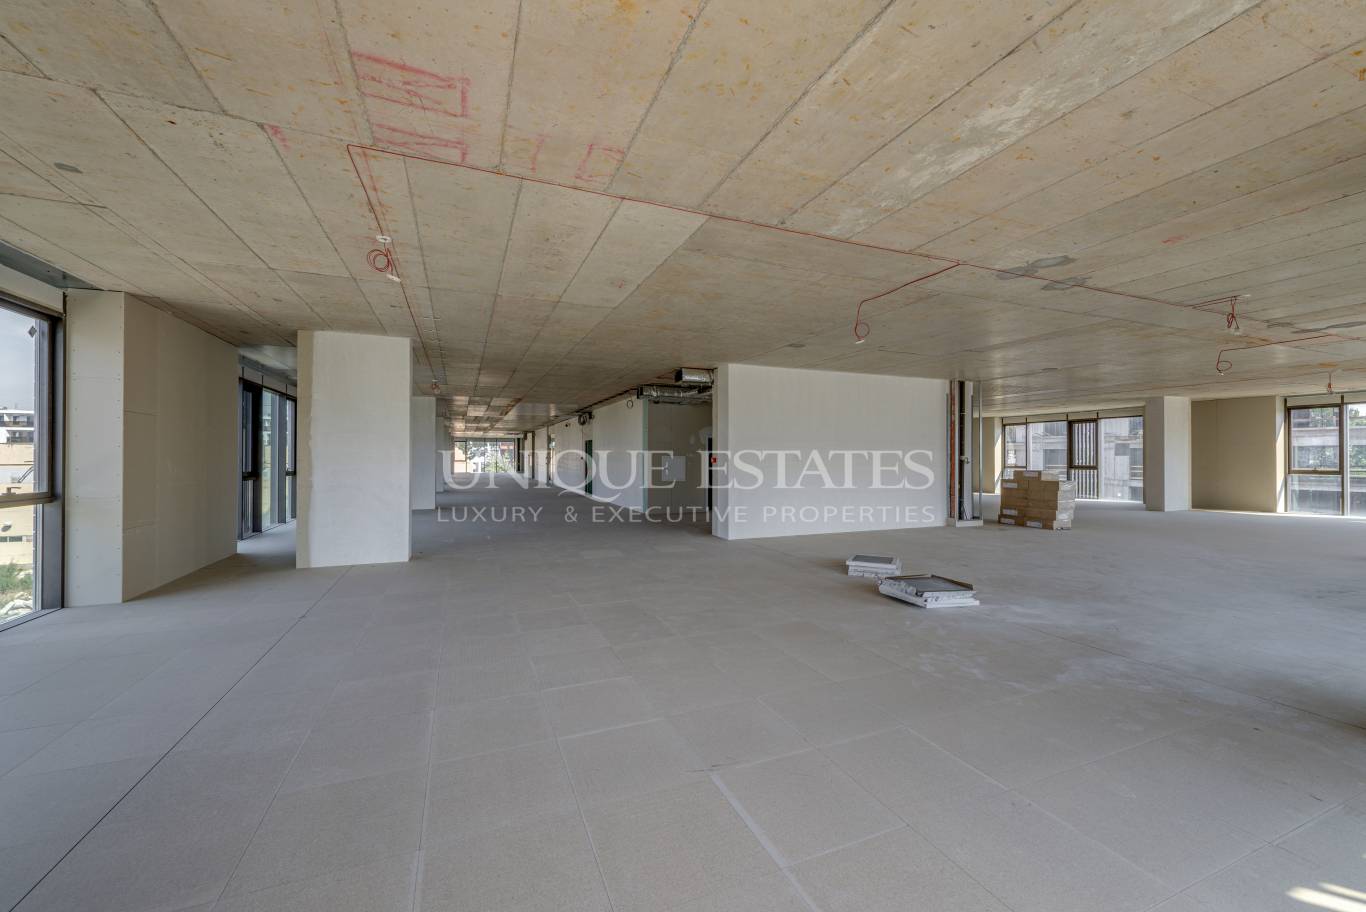 Office for sale in Sofia, Lozenets with listing ID: K14348 - image 7